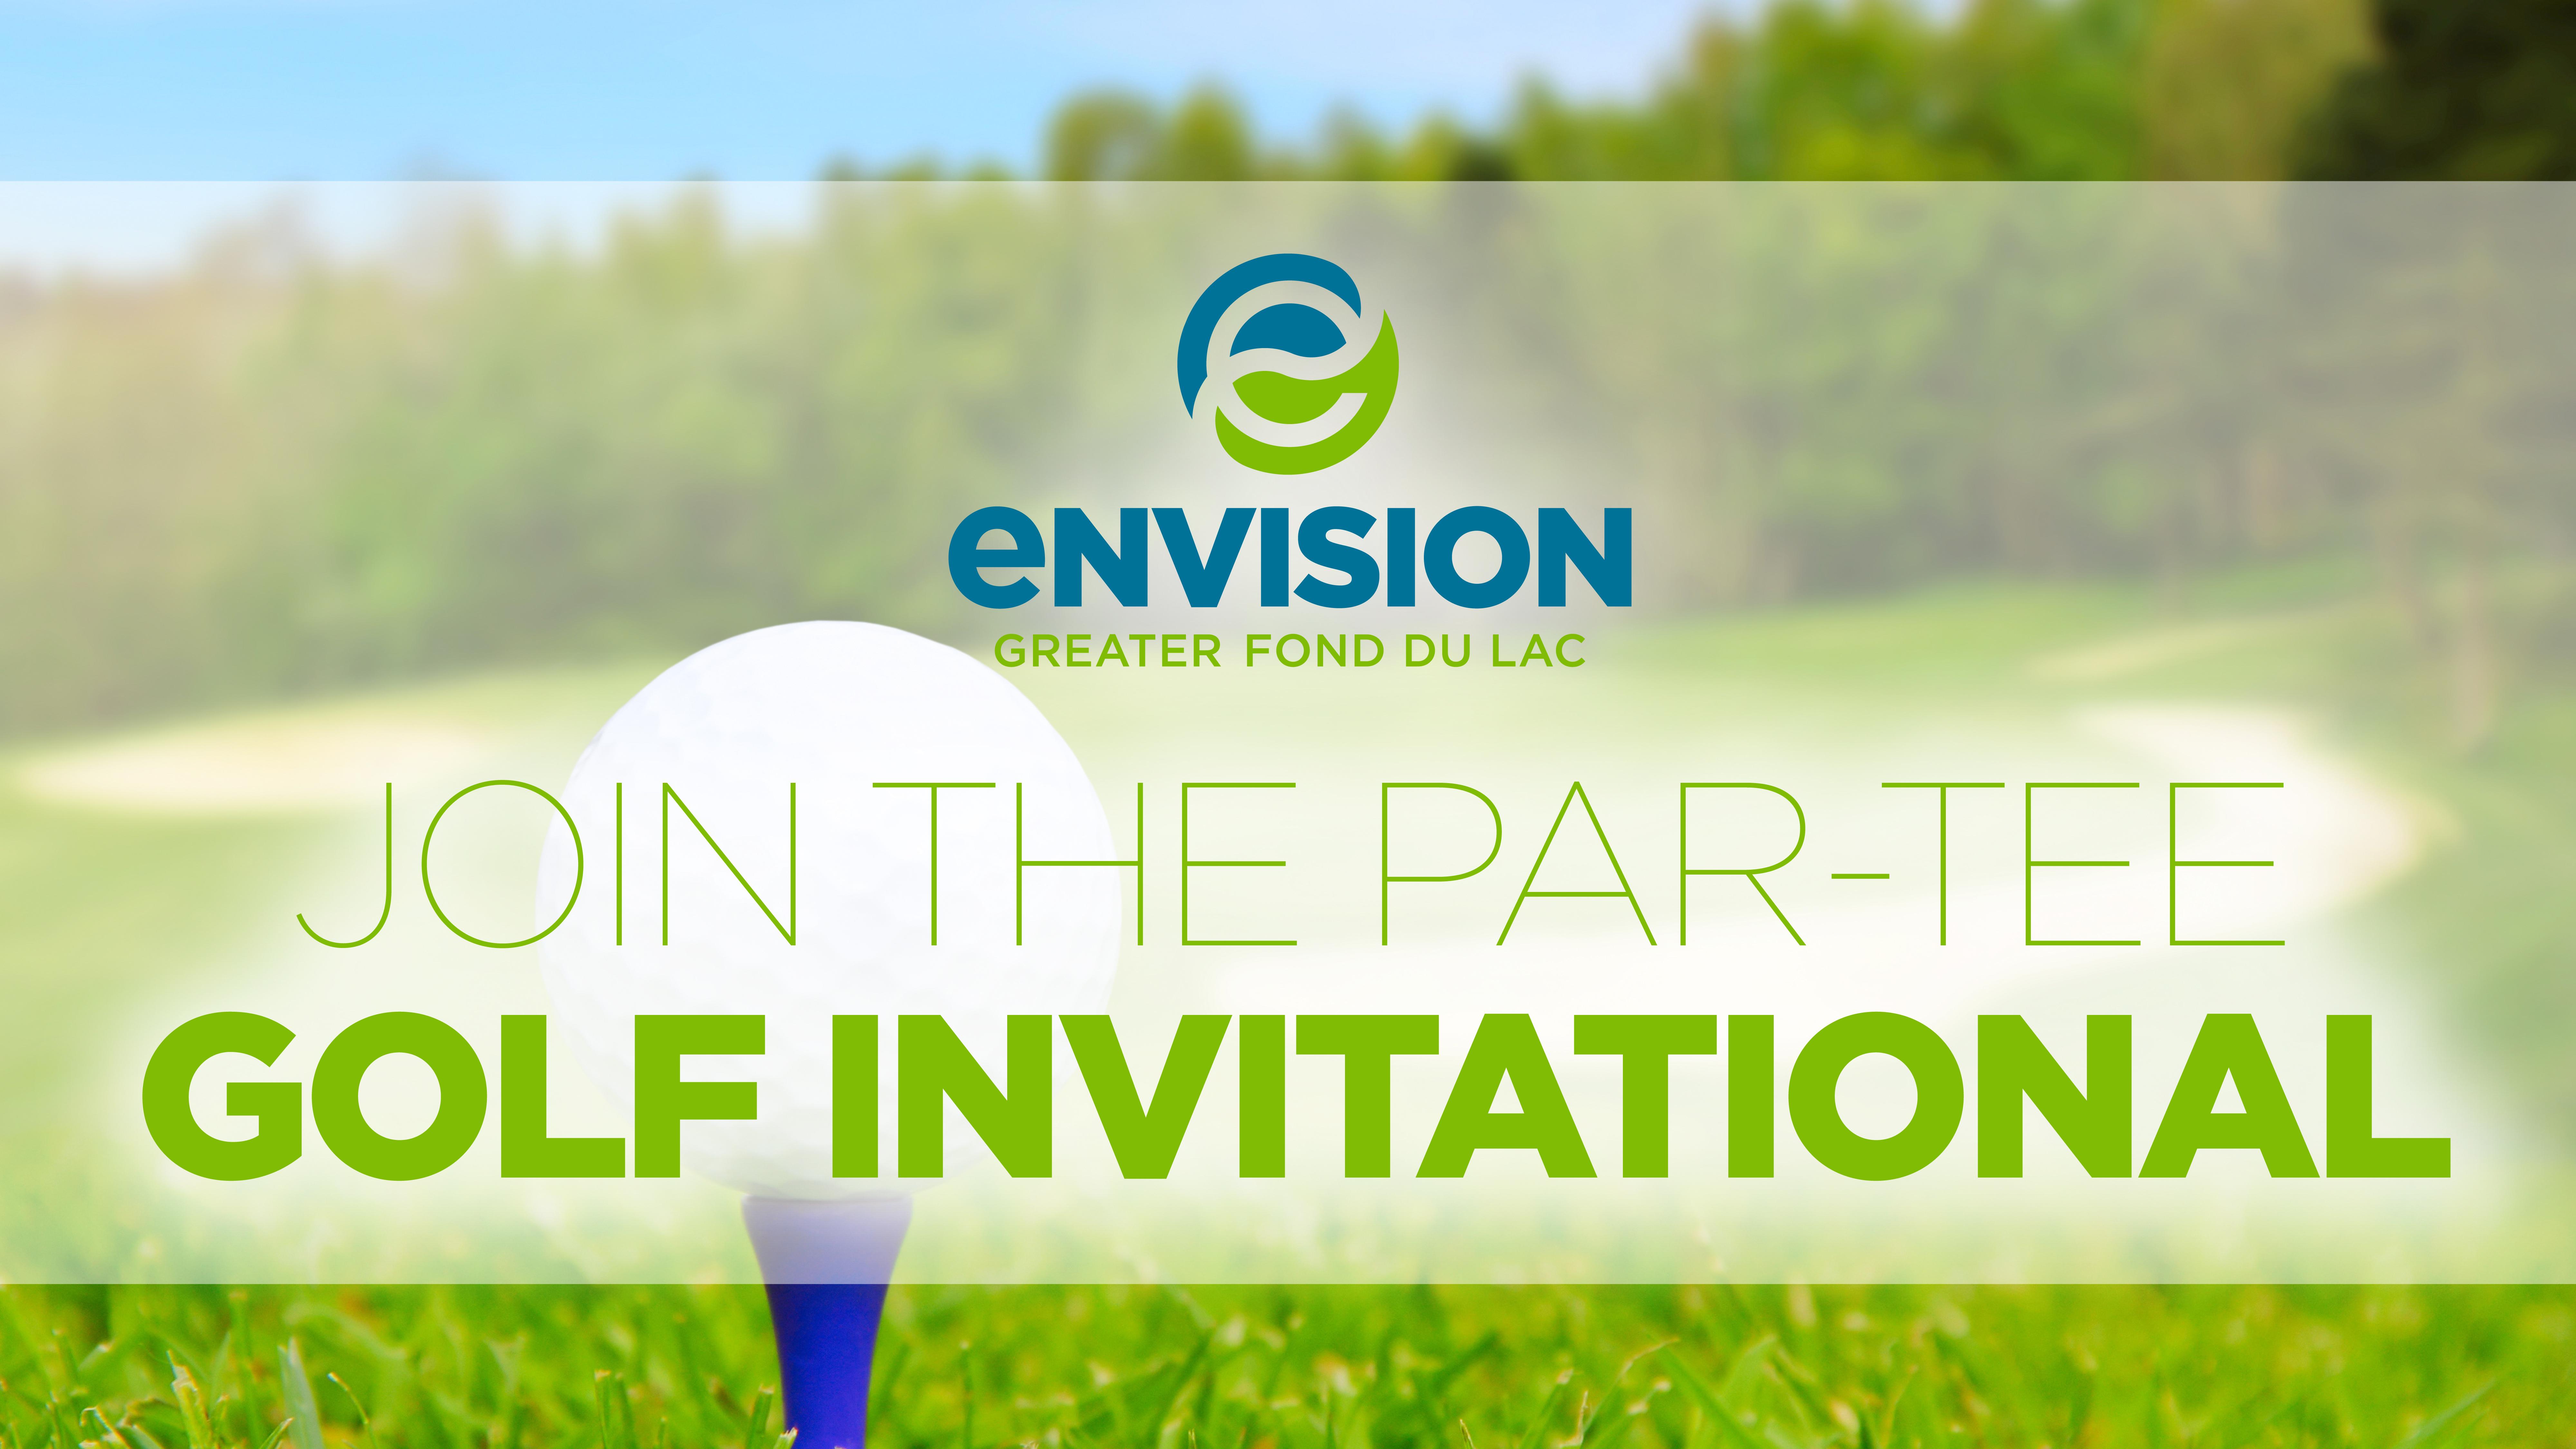 2019 Envision Greater Fond du Lac Golf Invitational